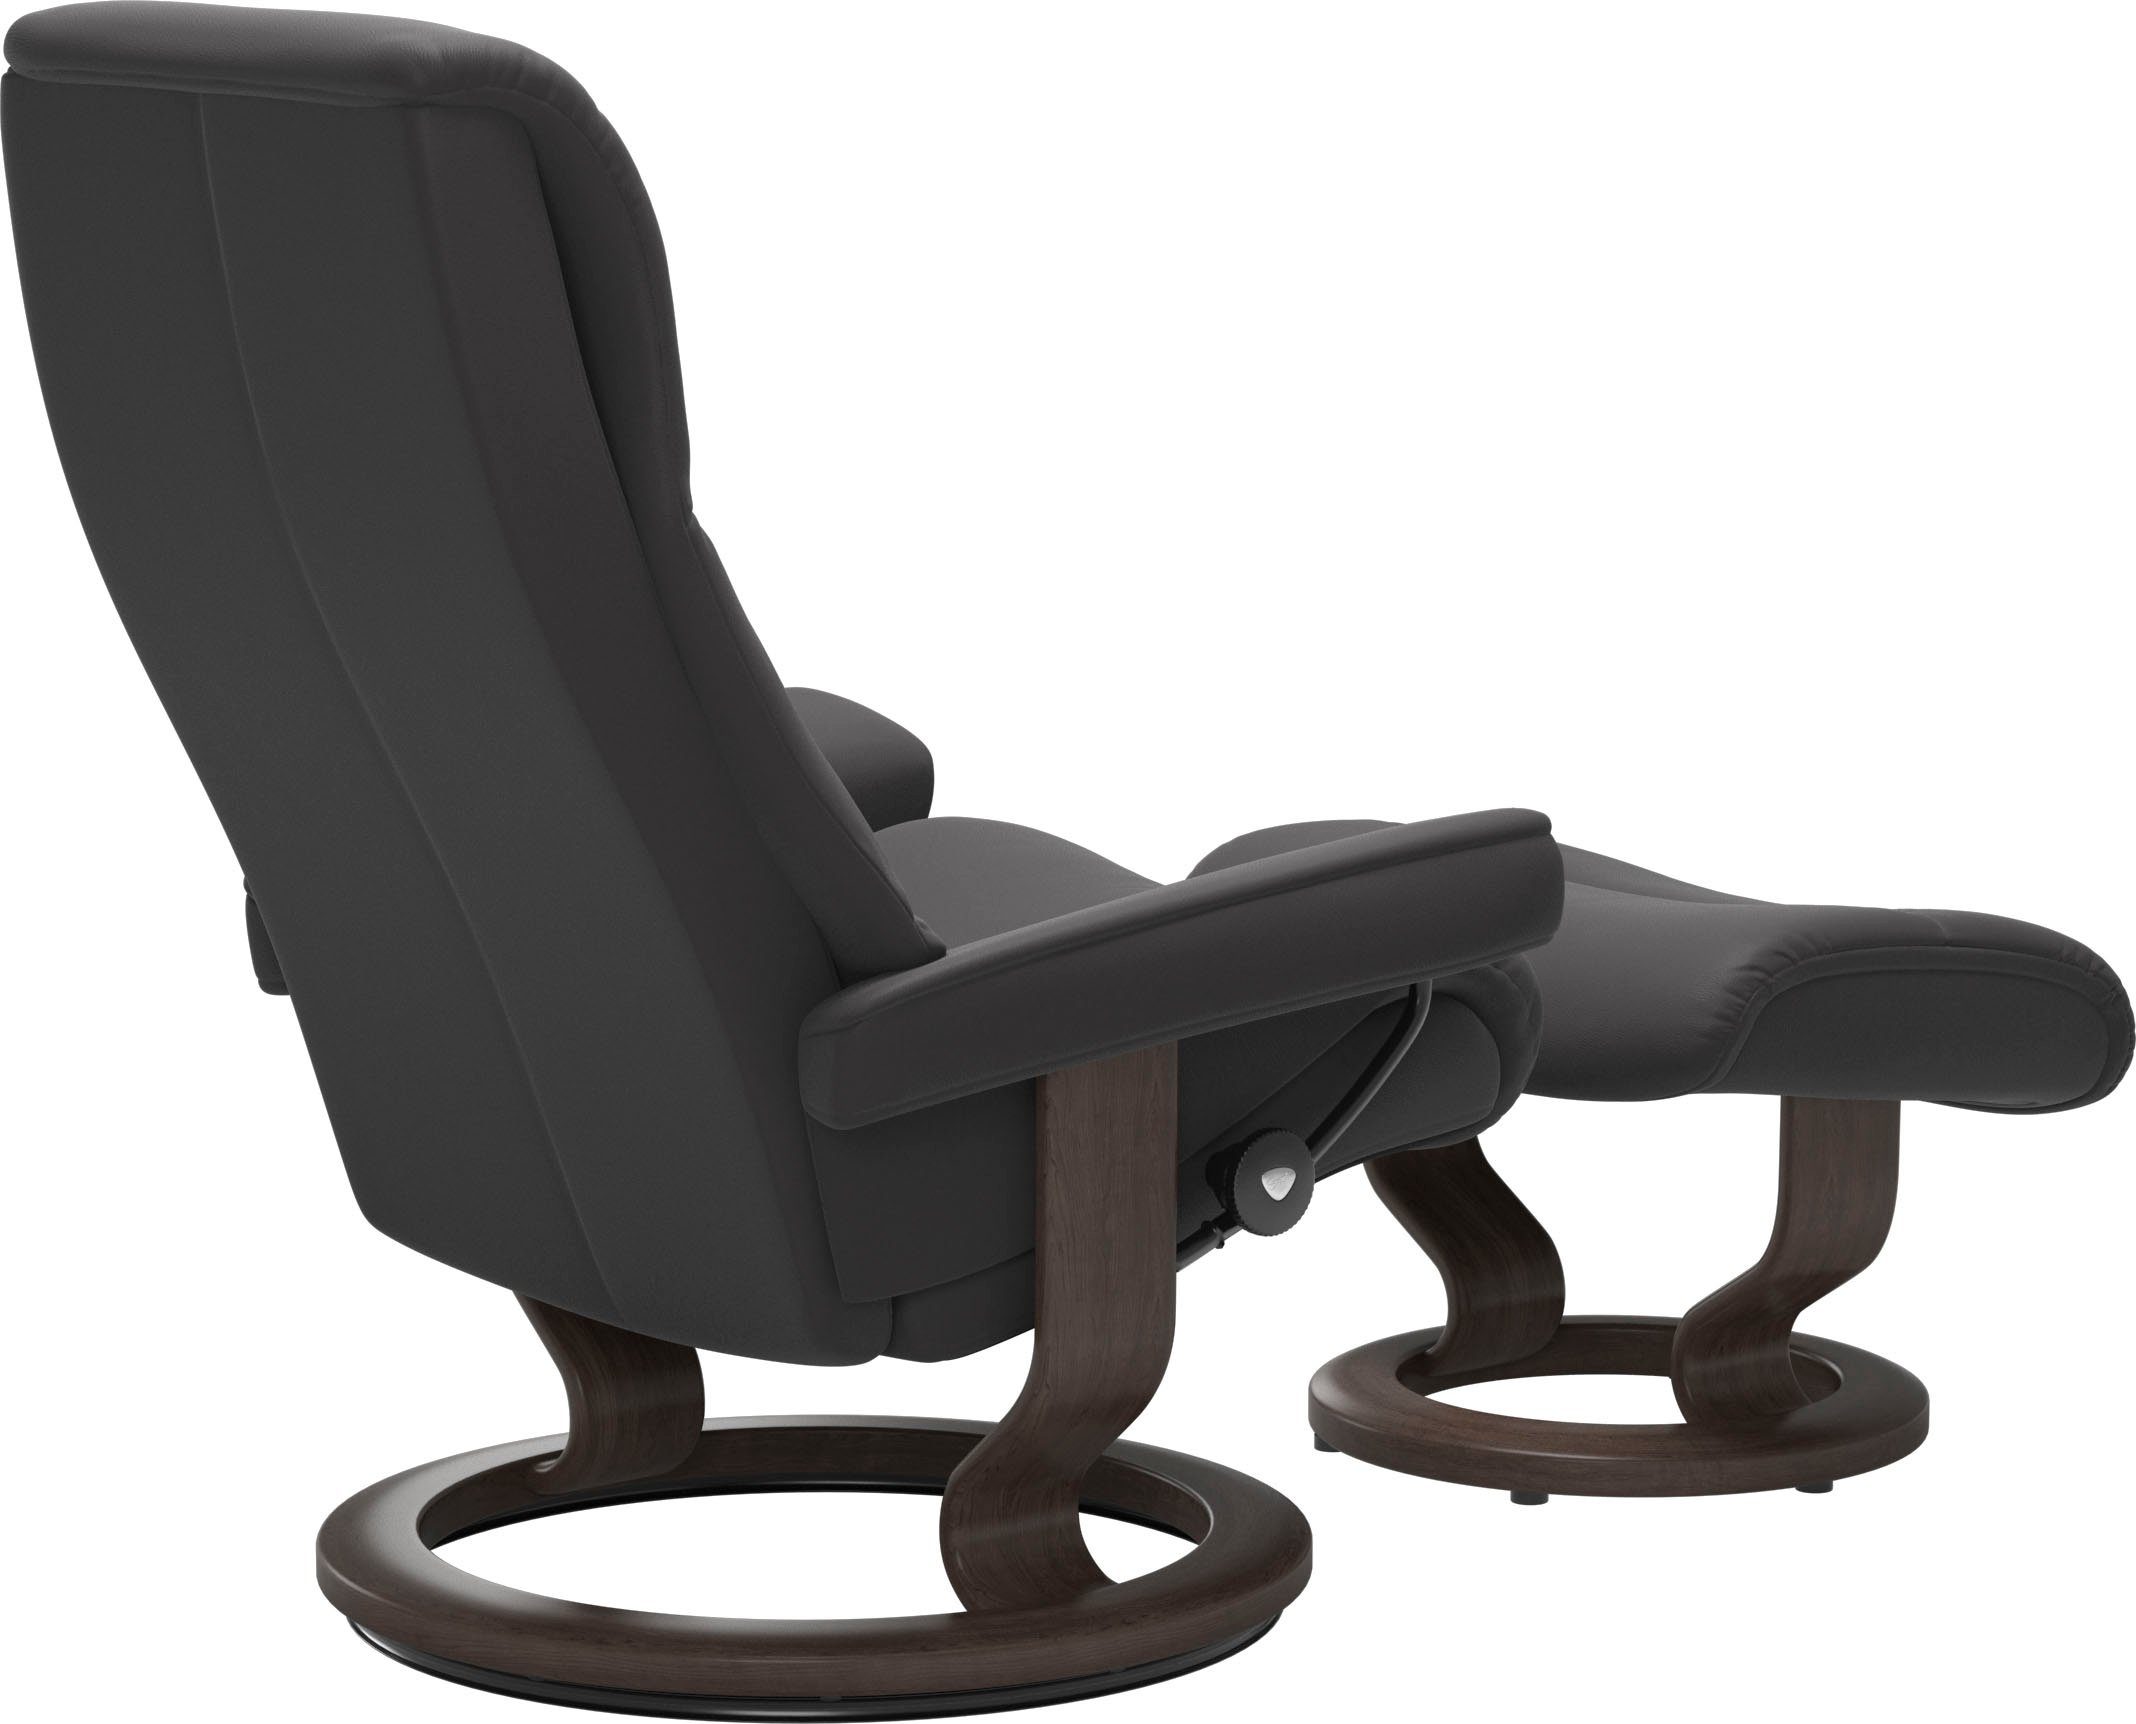 mit Base, Größe M,Gestell Stressless® Relaxsessel Wenge View, Classic